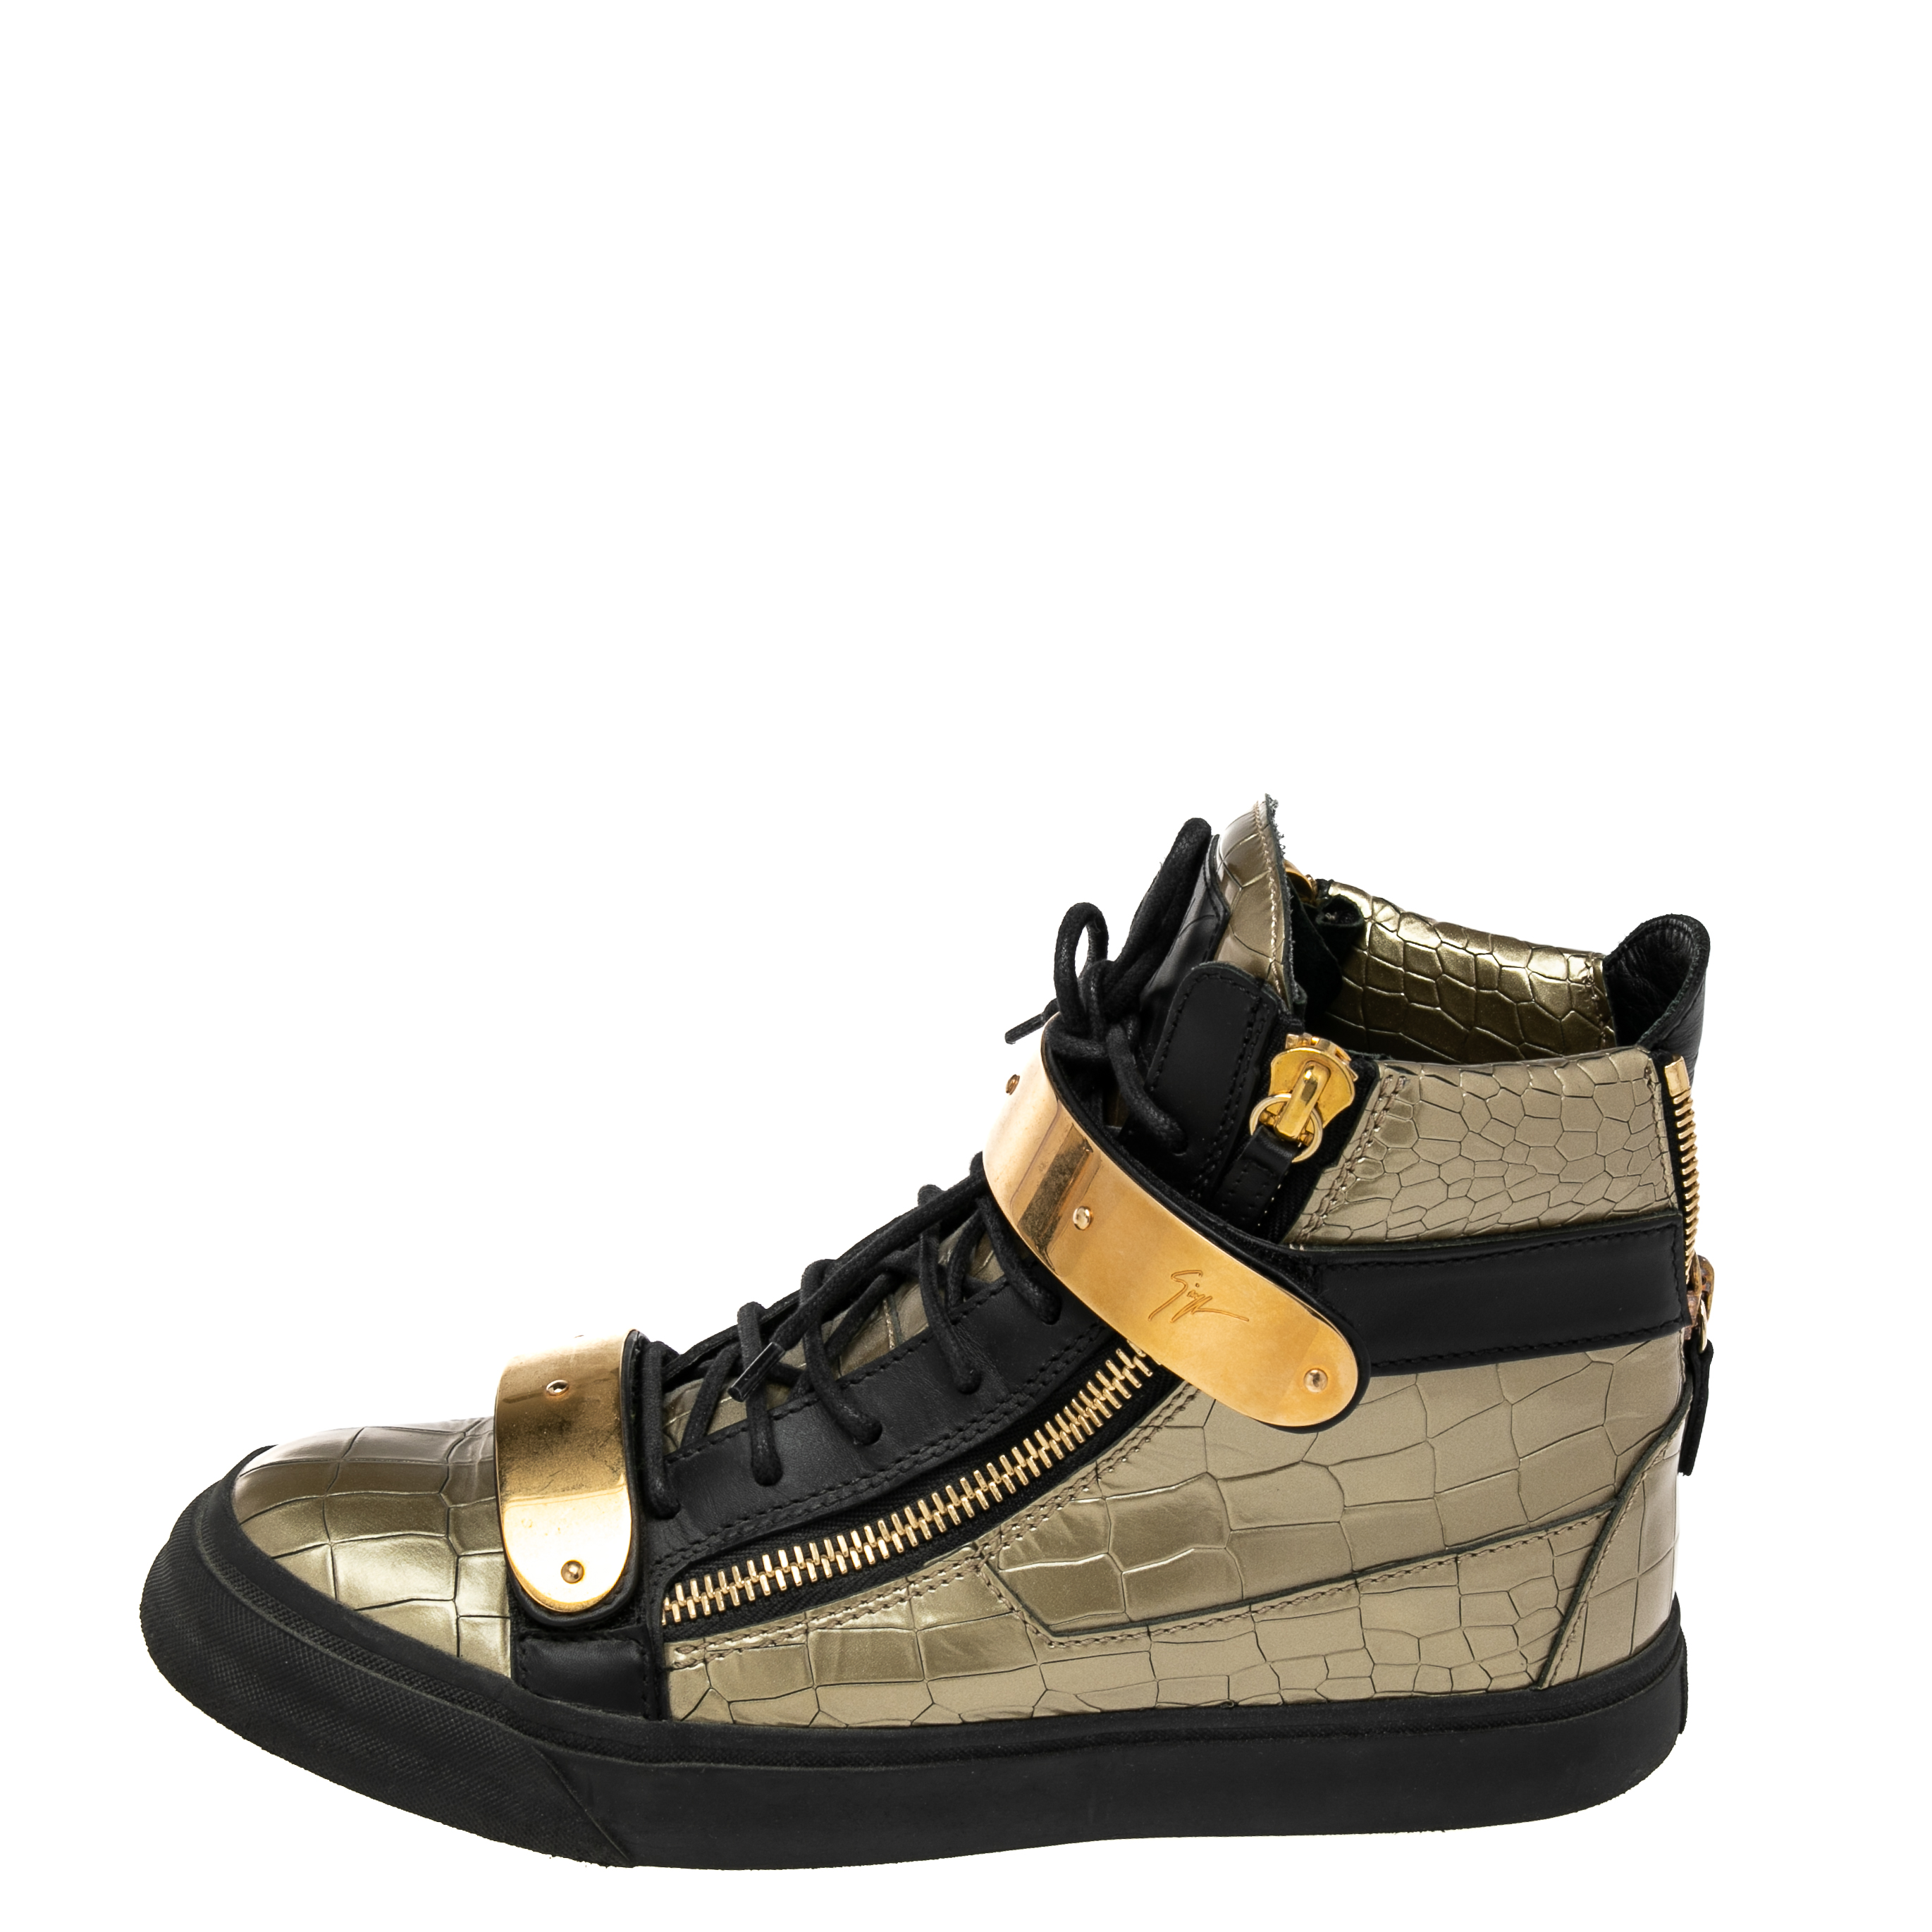 

Giuseppe Zanotti Metallic Green Croc Embossed Leather Coby High Top Sneakers Size